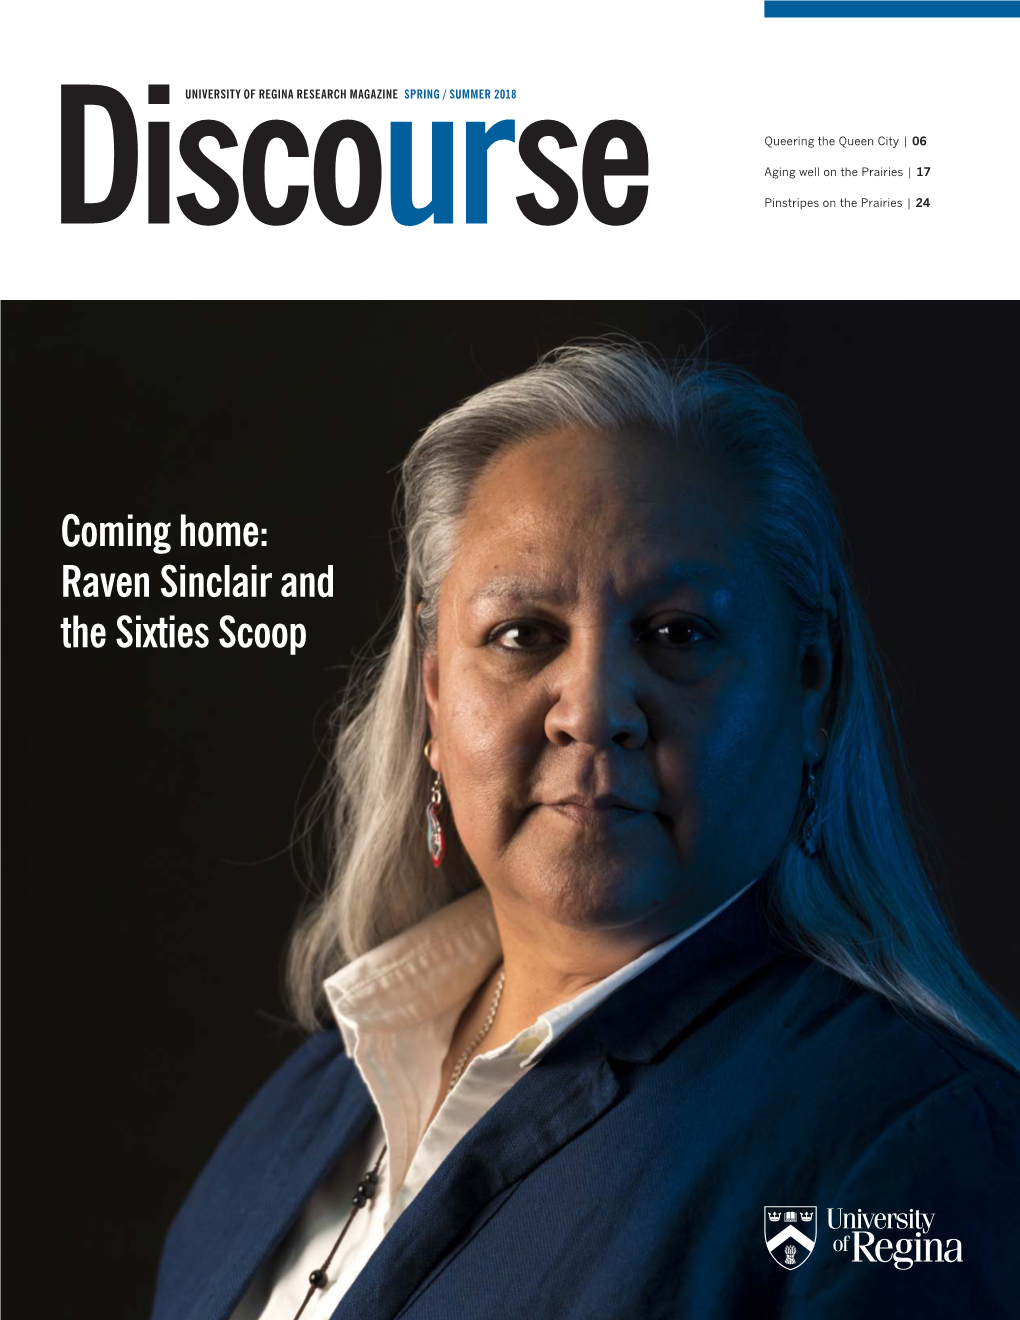 Coming Home: Raven Sinclair and the Sixties Scoop 12 Michael DISCOURSE |Bell SPRING / SUMMER 2018 Feature